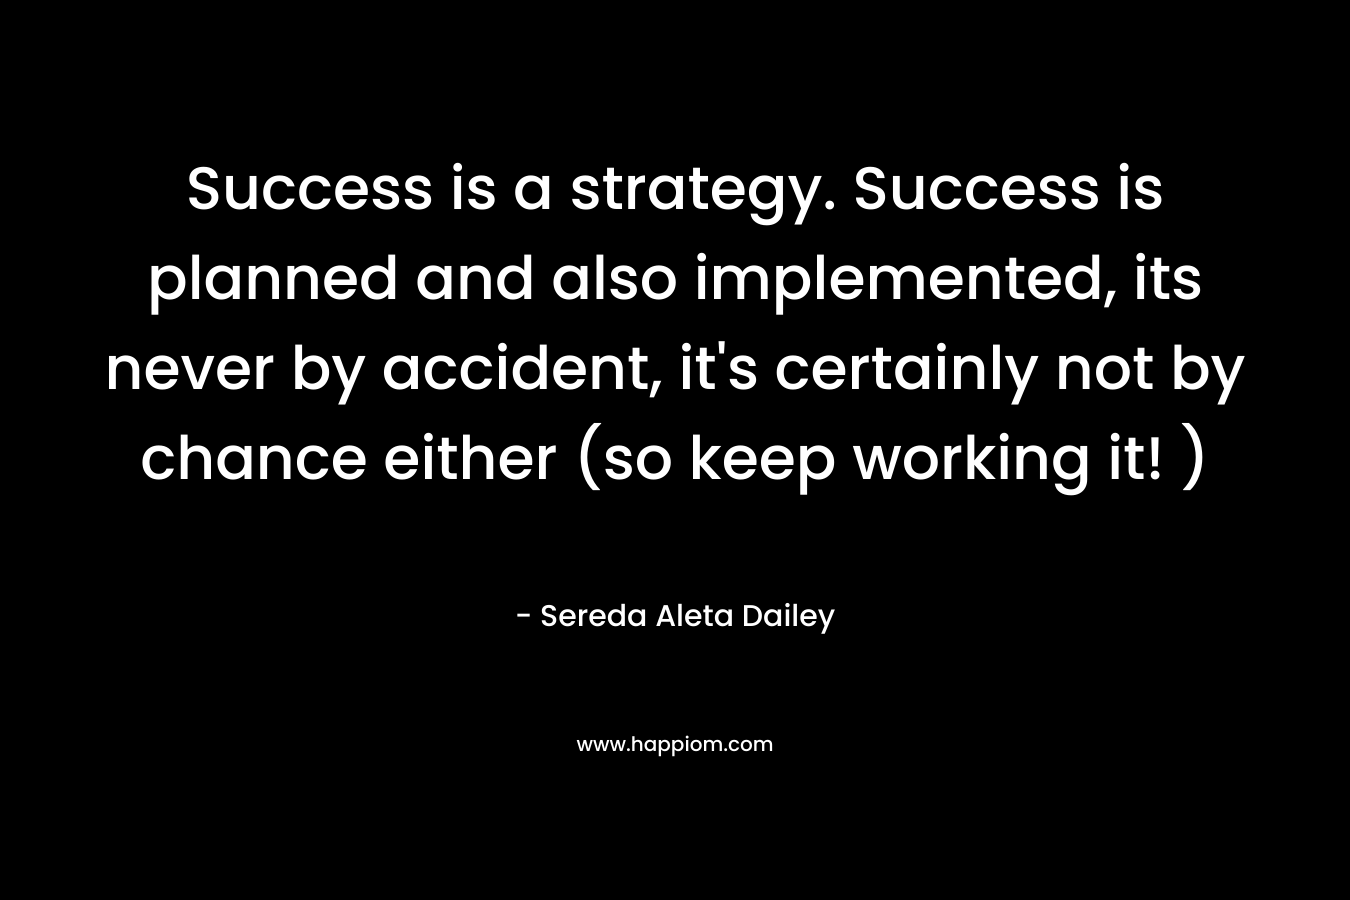 Success is a strategy. Success is planned and also implemented, its never by accident, it’s certainly not by chance either (so keep working it! ) – Sereda Aleta Dailey